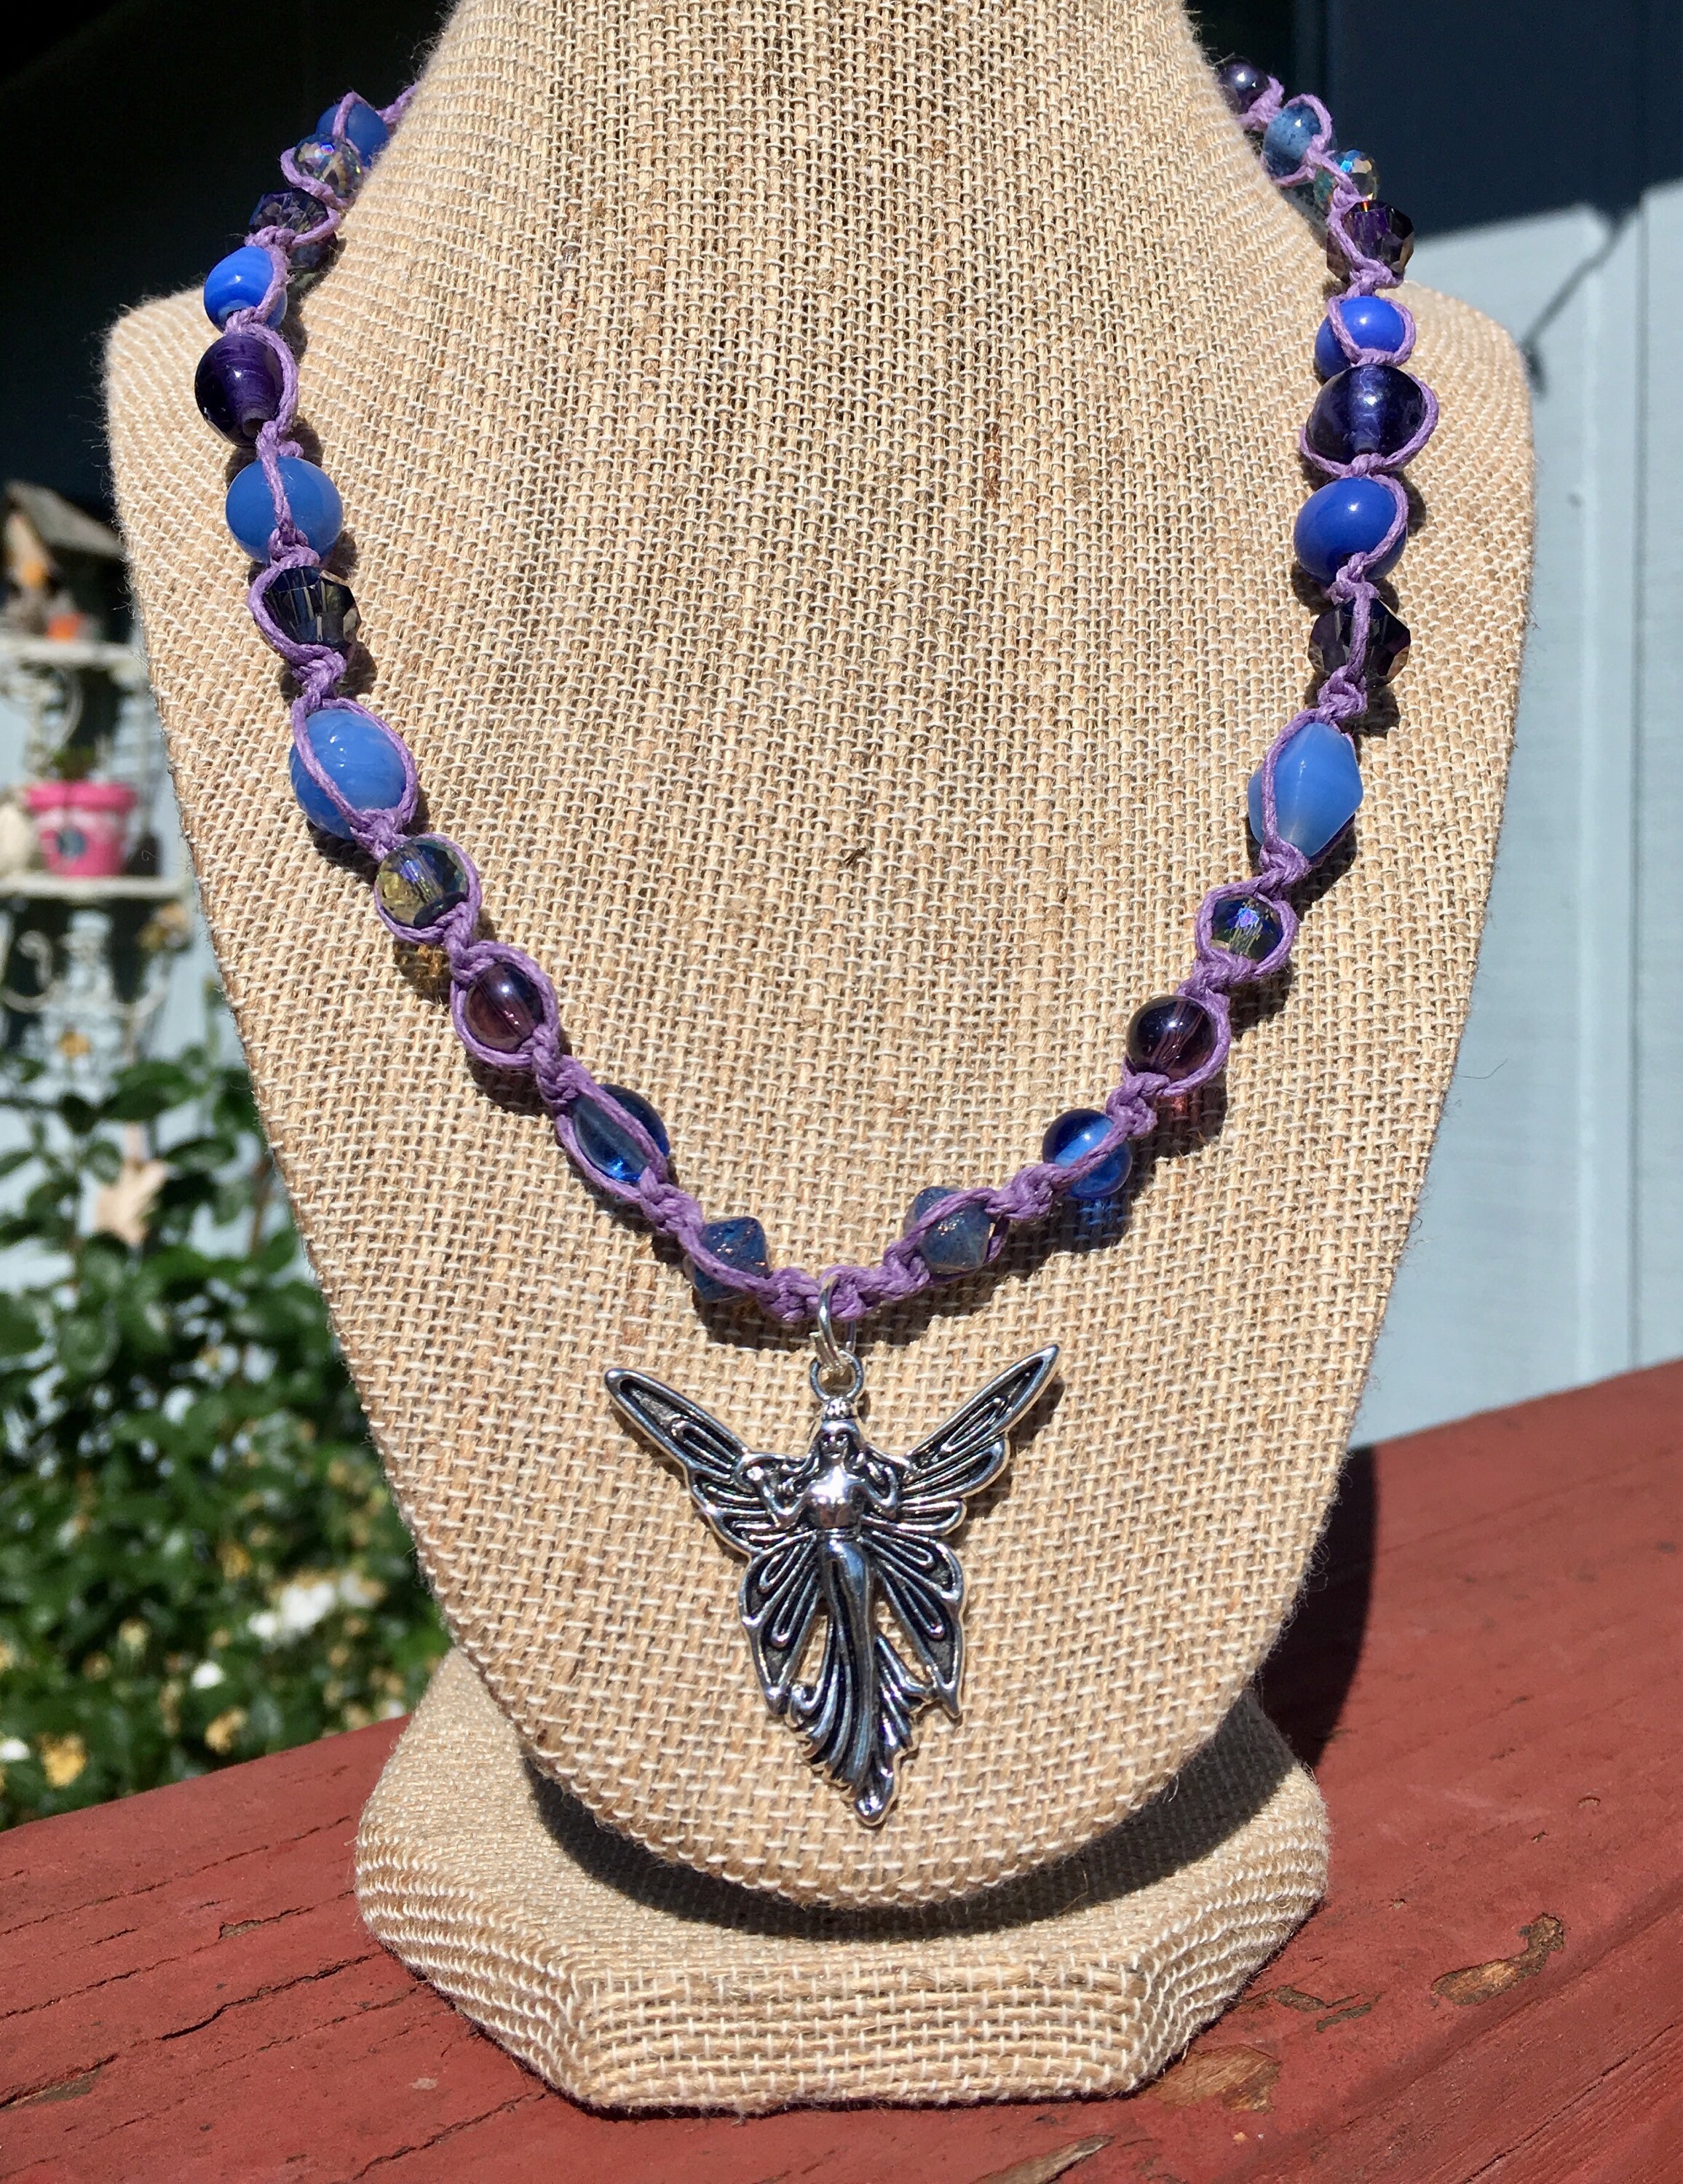 Macrame hemp necklace with amethyst pendant and glass beads